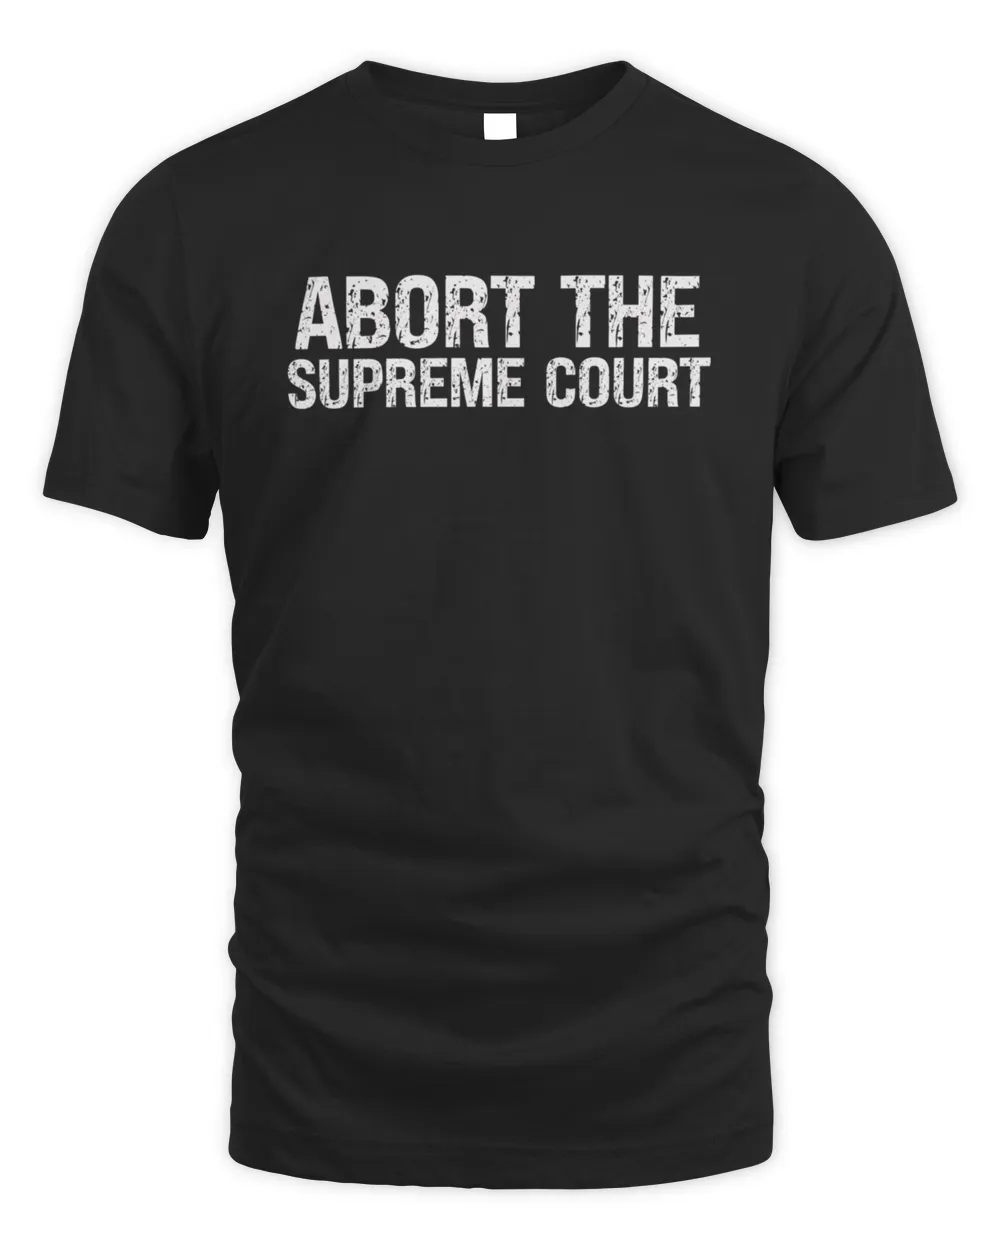 Abort the Supreme Court rights for women7894 T-Shirt